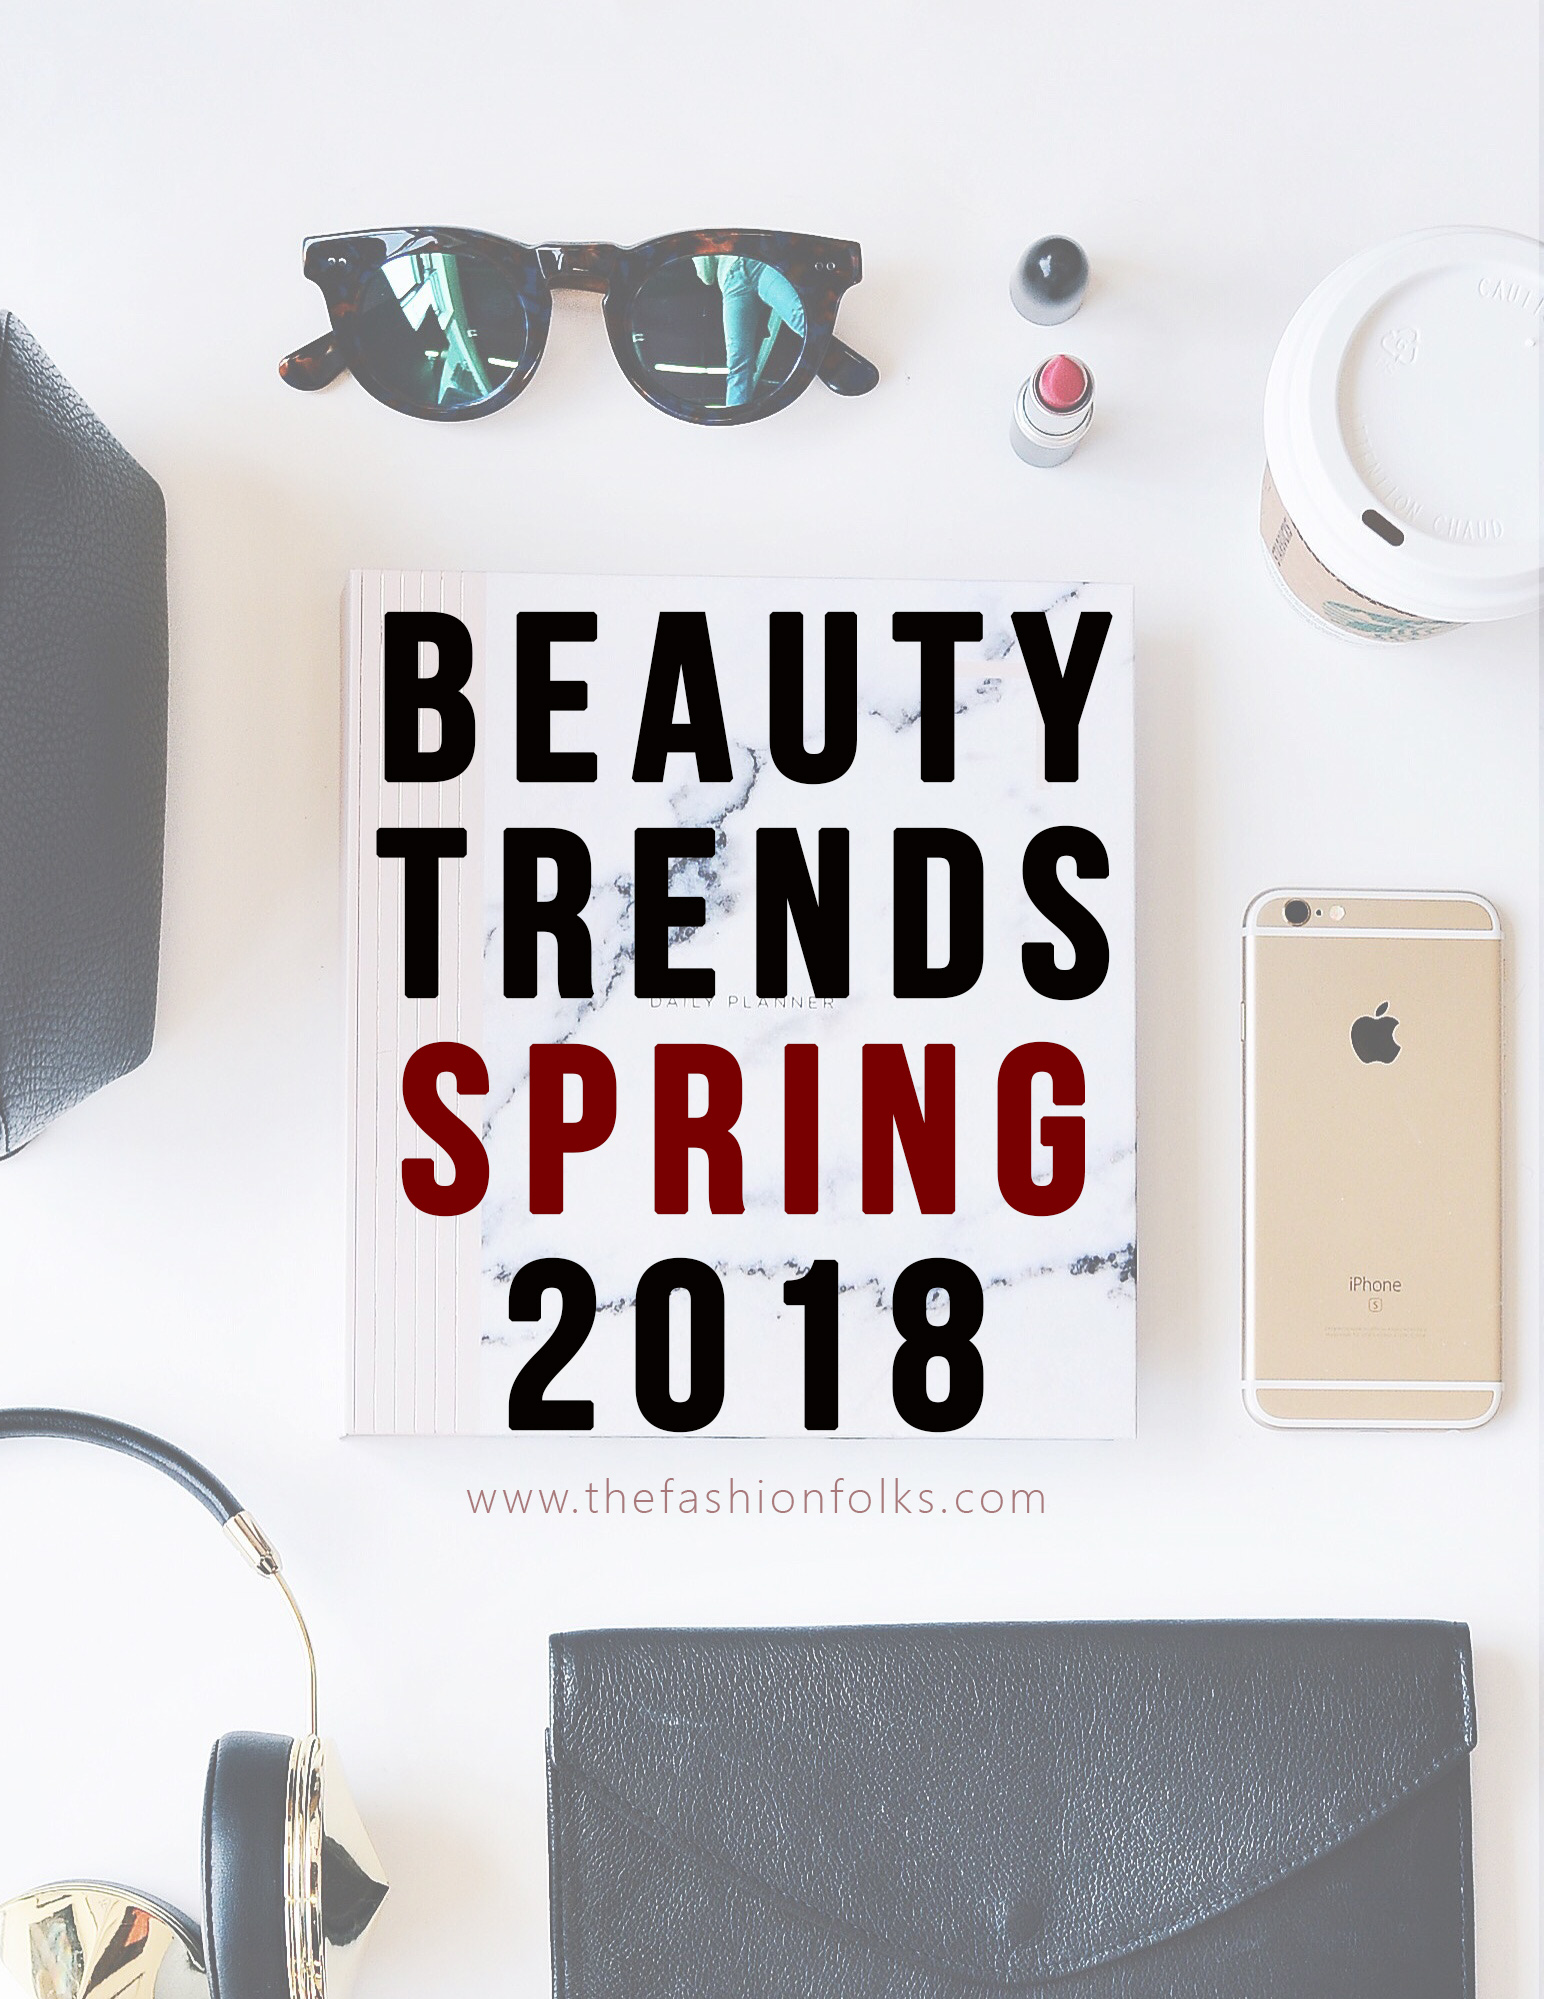 Beauty Trends Spring 2018 - The Fashion Folks